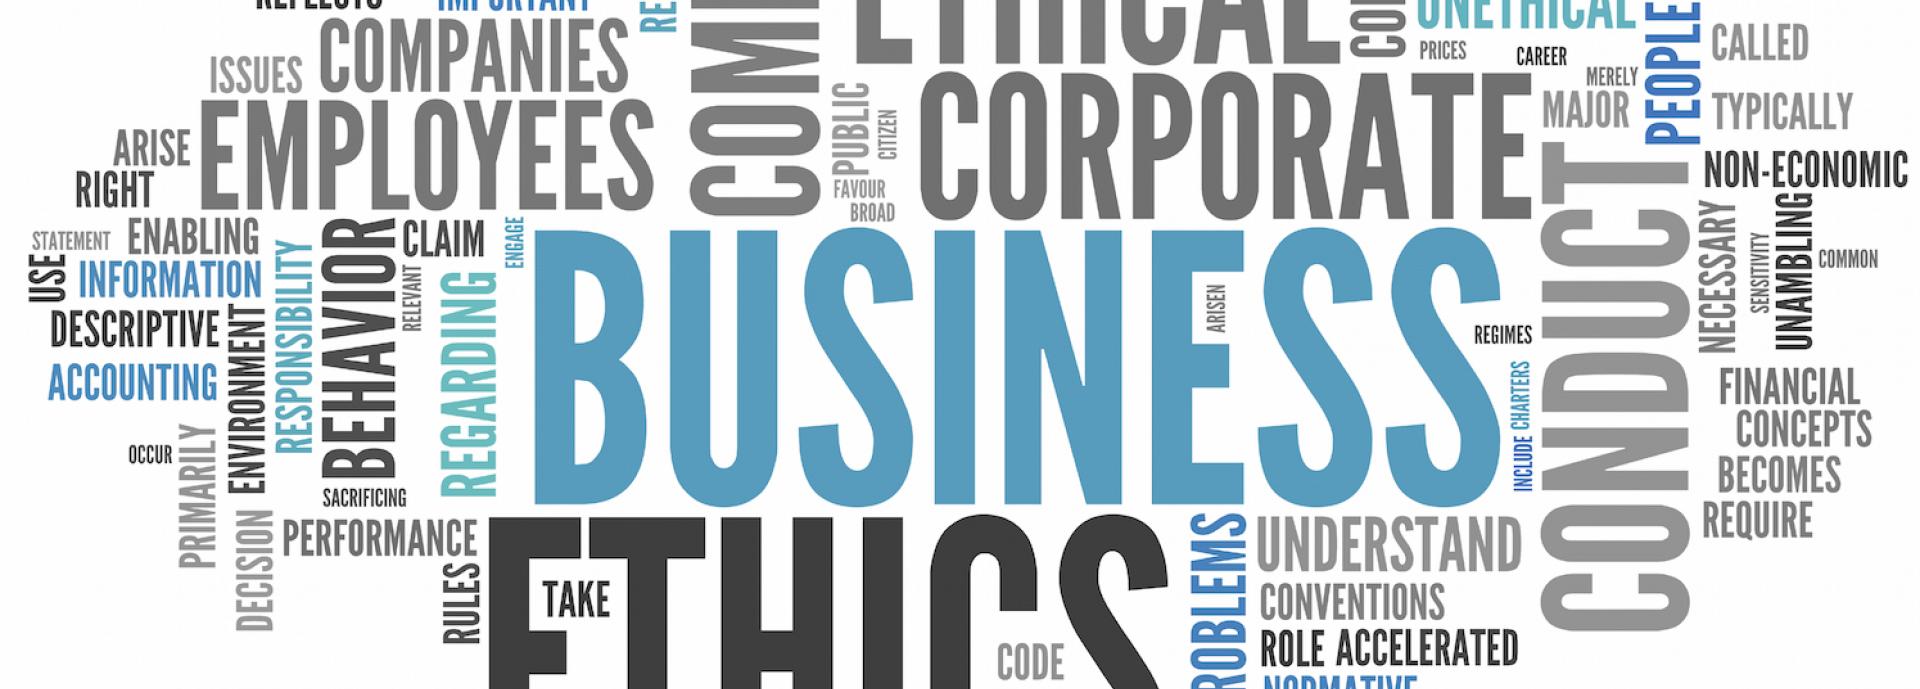 When the import. Business Ethics. Ethical Business. Corporate Ethics. Business Ethics картинки.